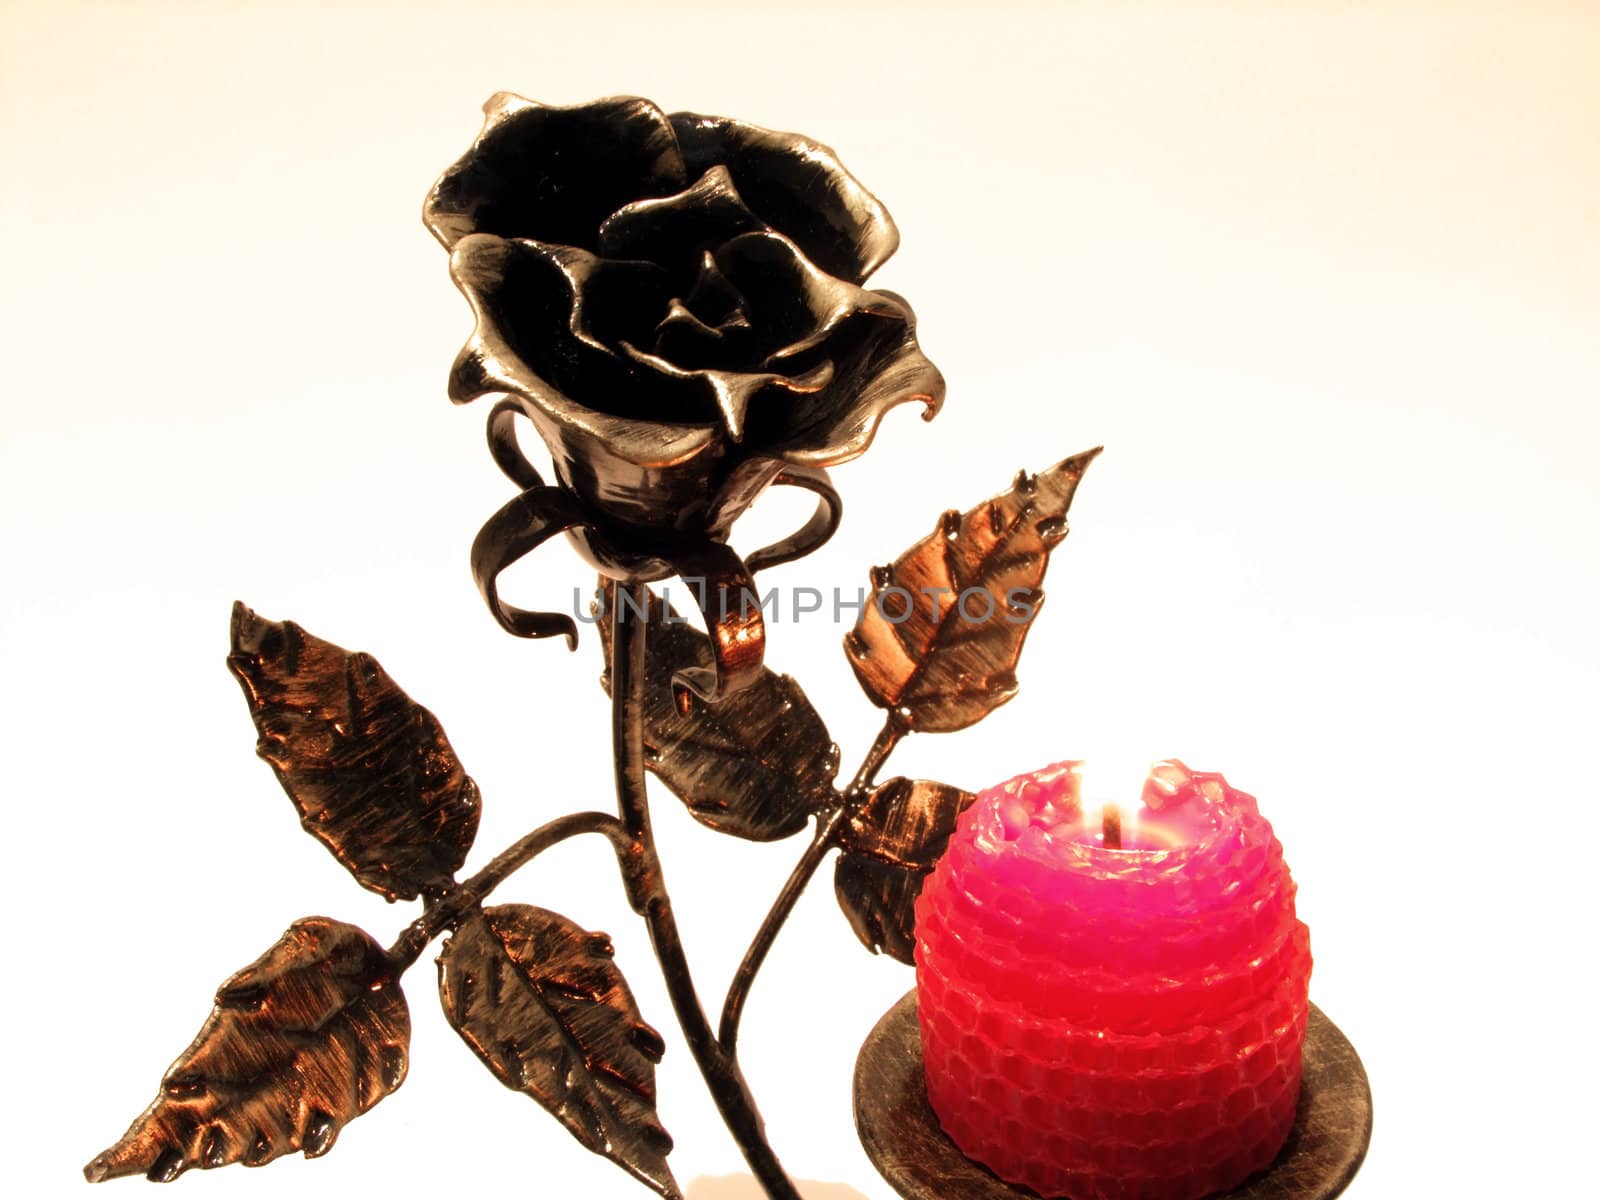 metallic candle with a rose and a candle